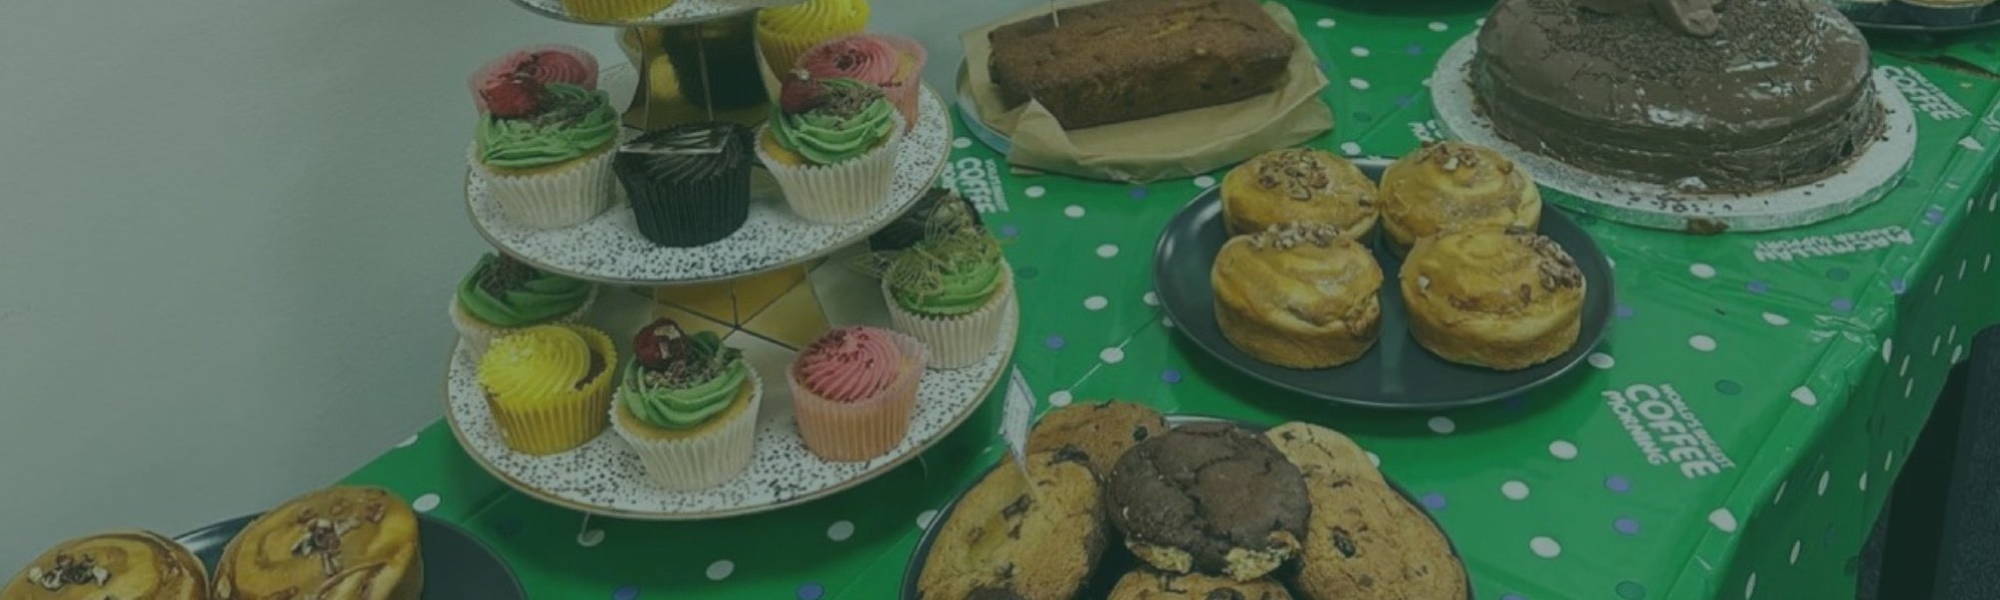 cake and coffee morning to raise money for macmillan cancer